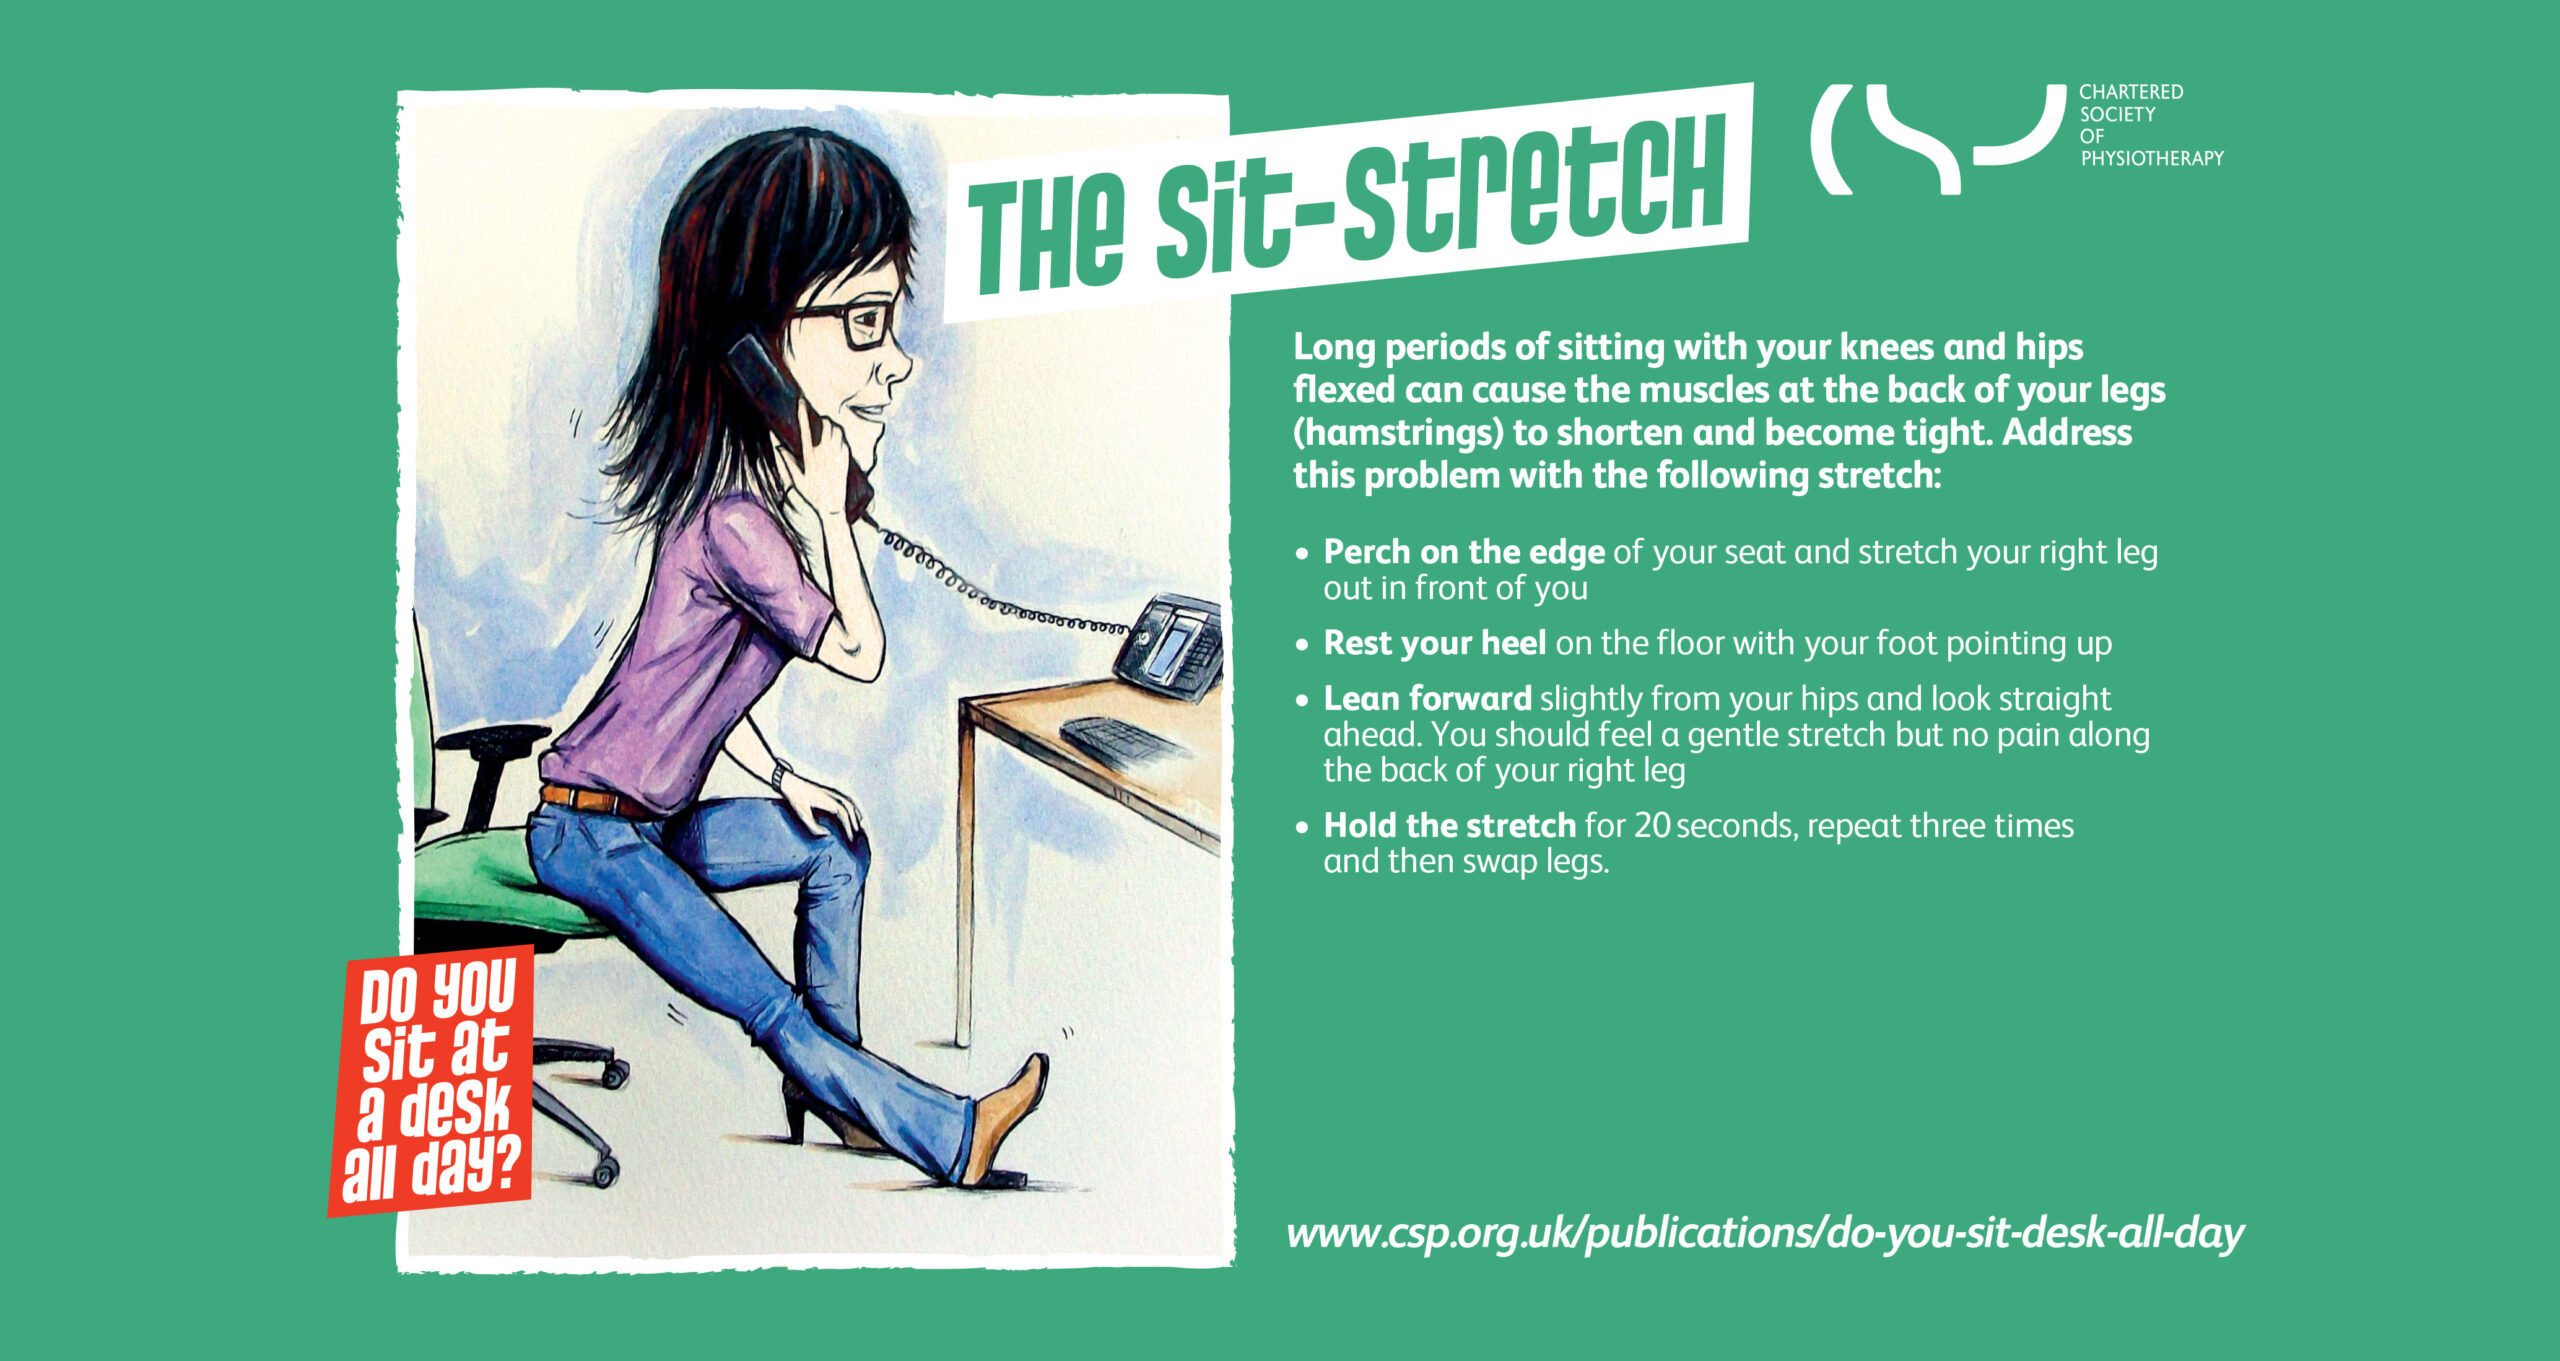 Chartered society of physiotherapy exercise card for the Sit-Stretch